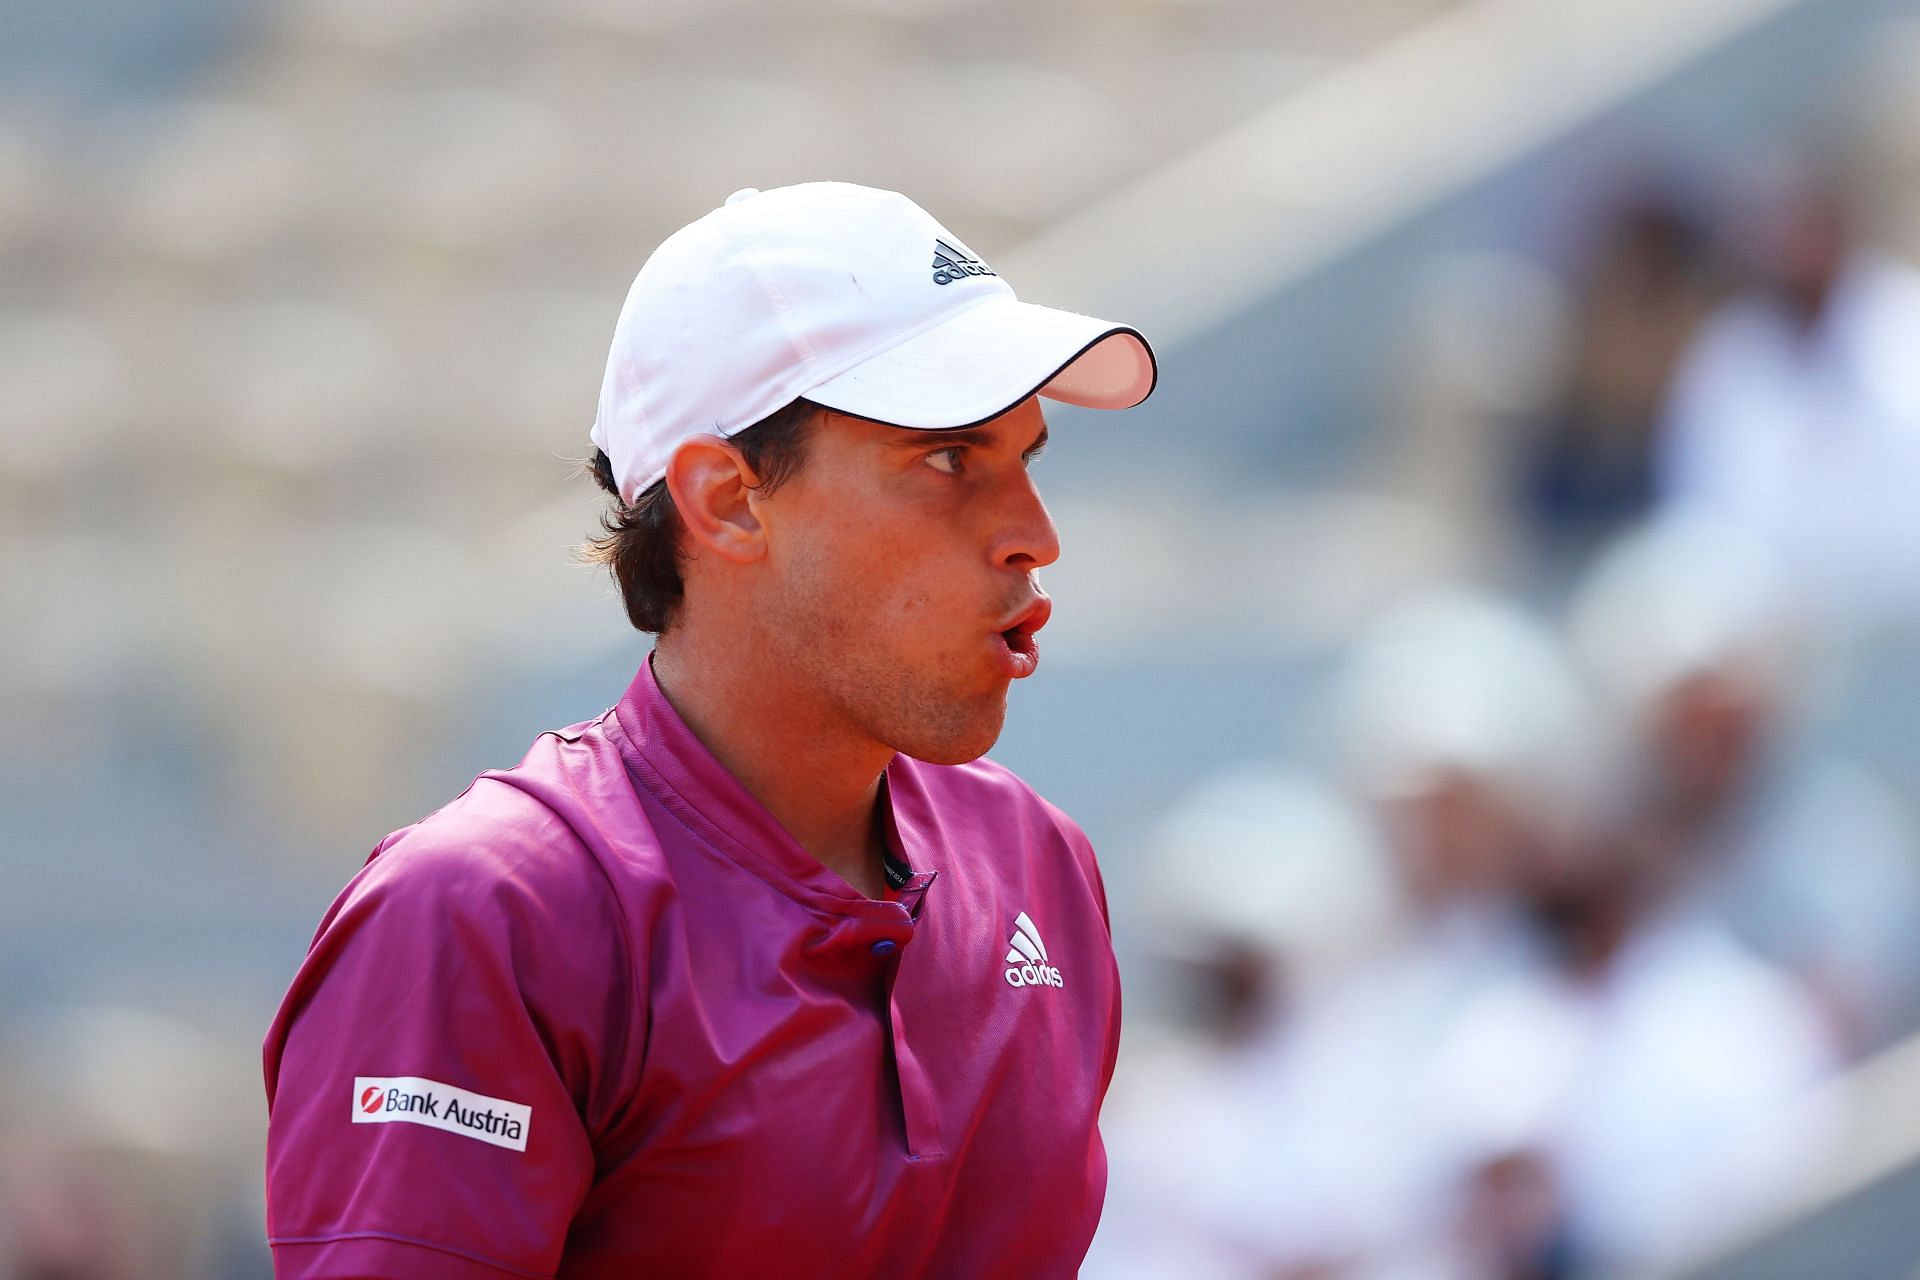 The 2020 US Open winner has suffered a minor setback in his comeback